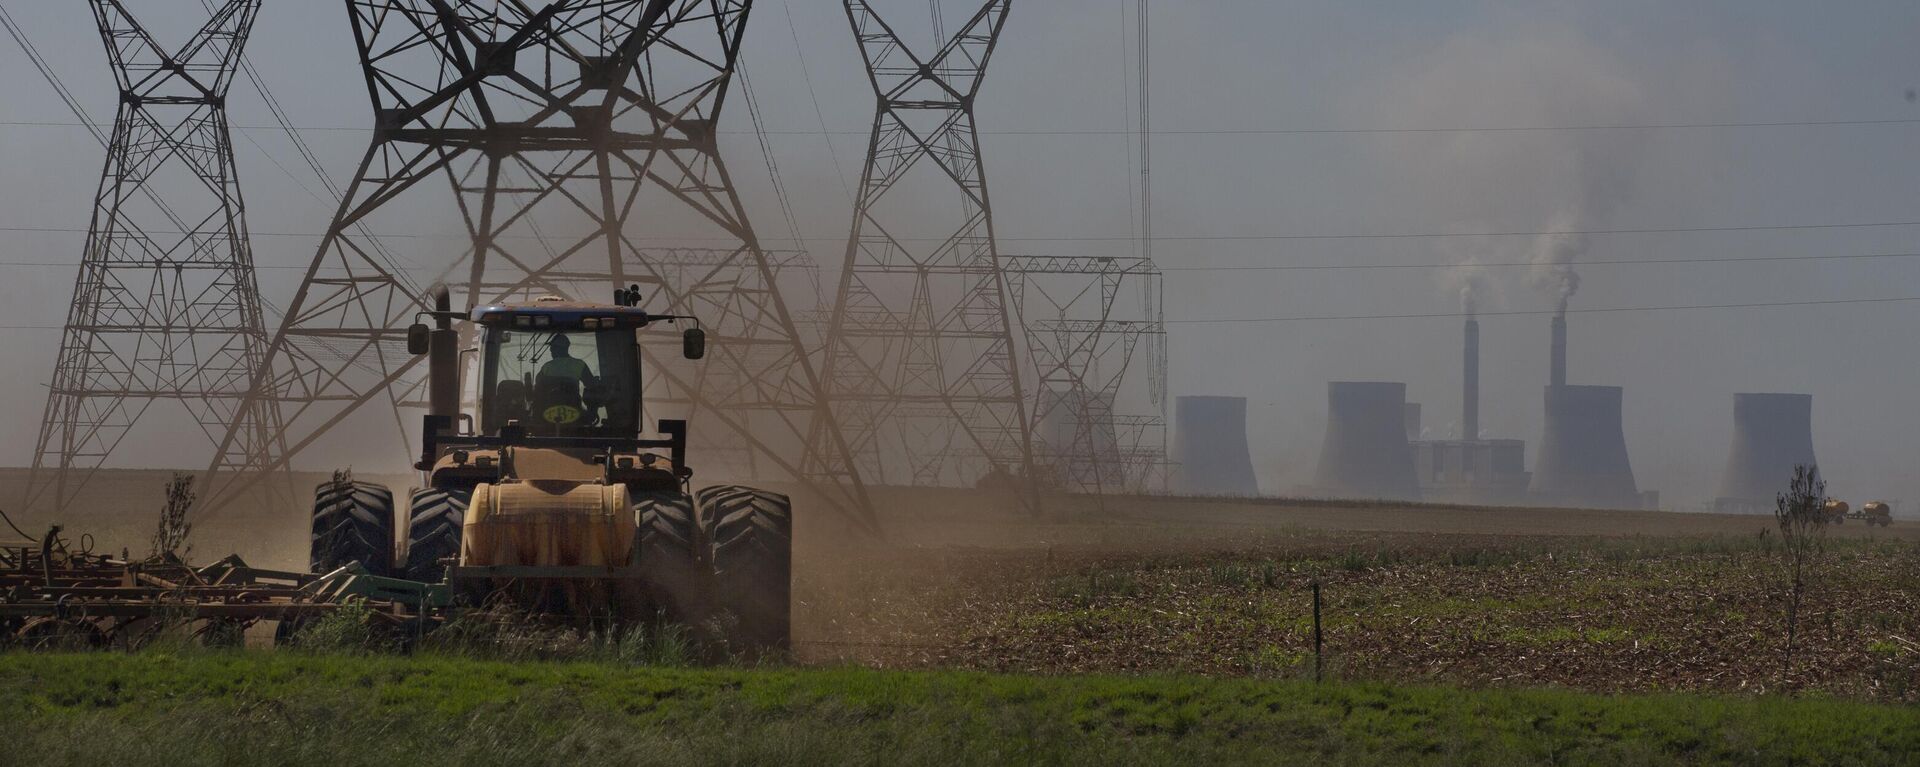 The land is ploughed under electrical pylons leading from a coal-powered electricity generating plant east of Johannesburg, Thursday, Nov. 17 2022 - Sputnik International, 1920, 02.02.2023